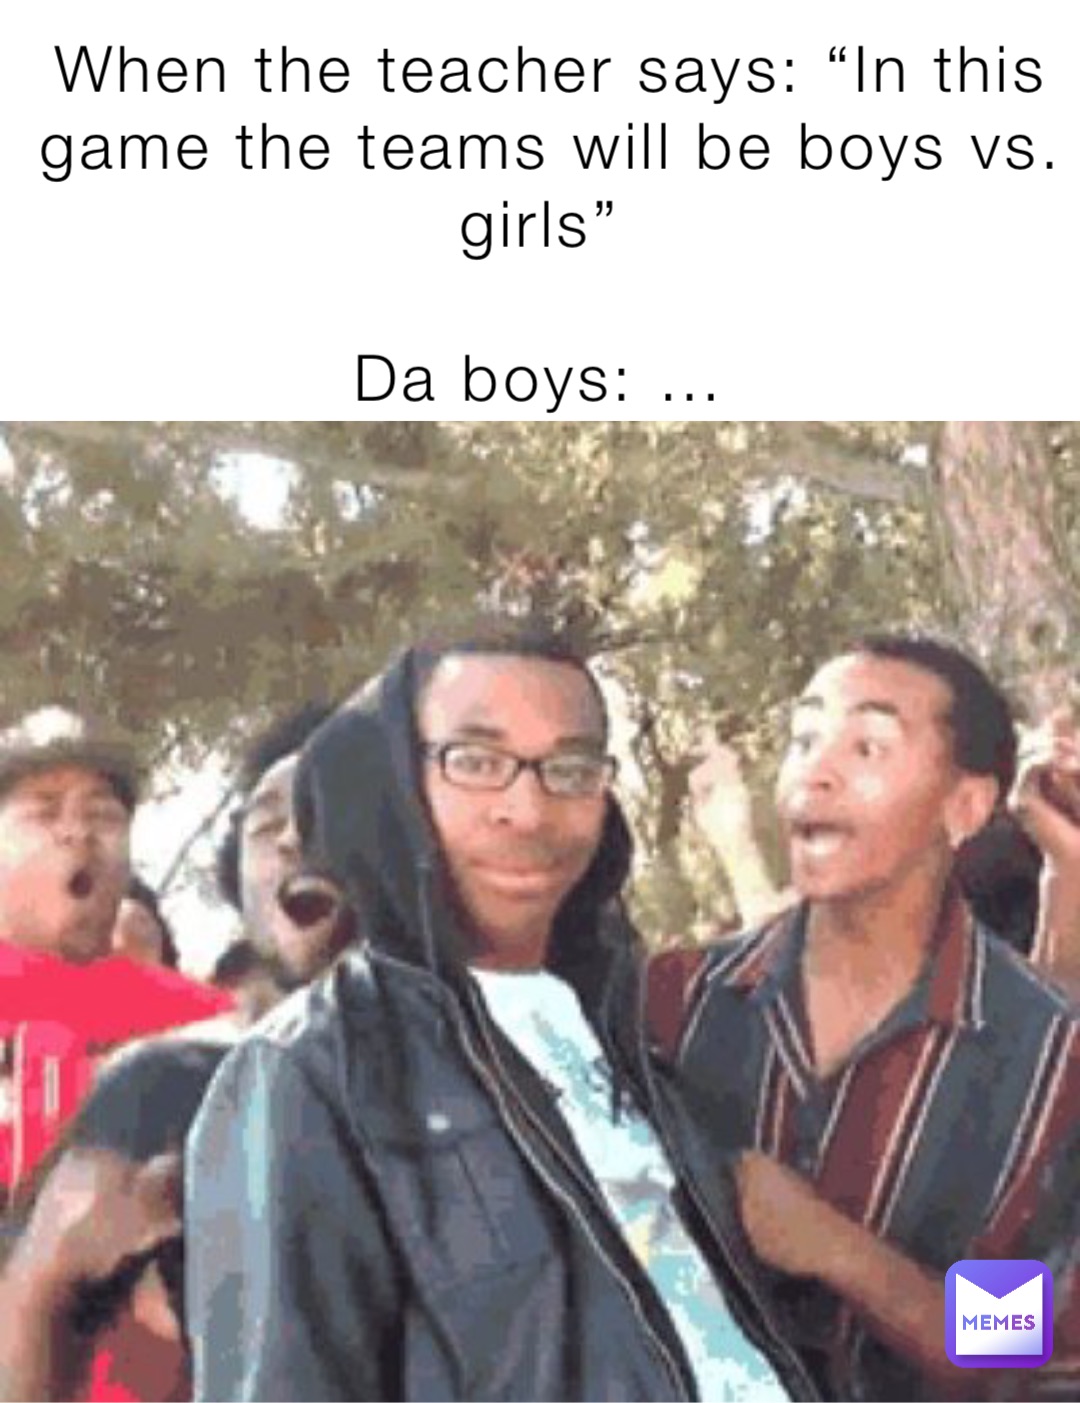 When the teacher says: “In this game the teams will be boys vs. girls”

Da boys: …